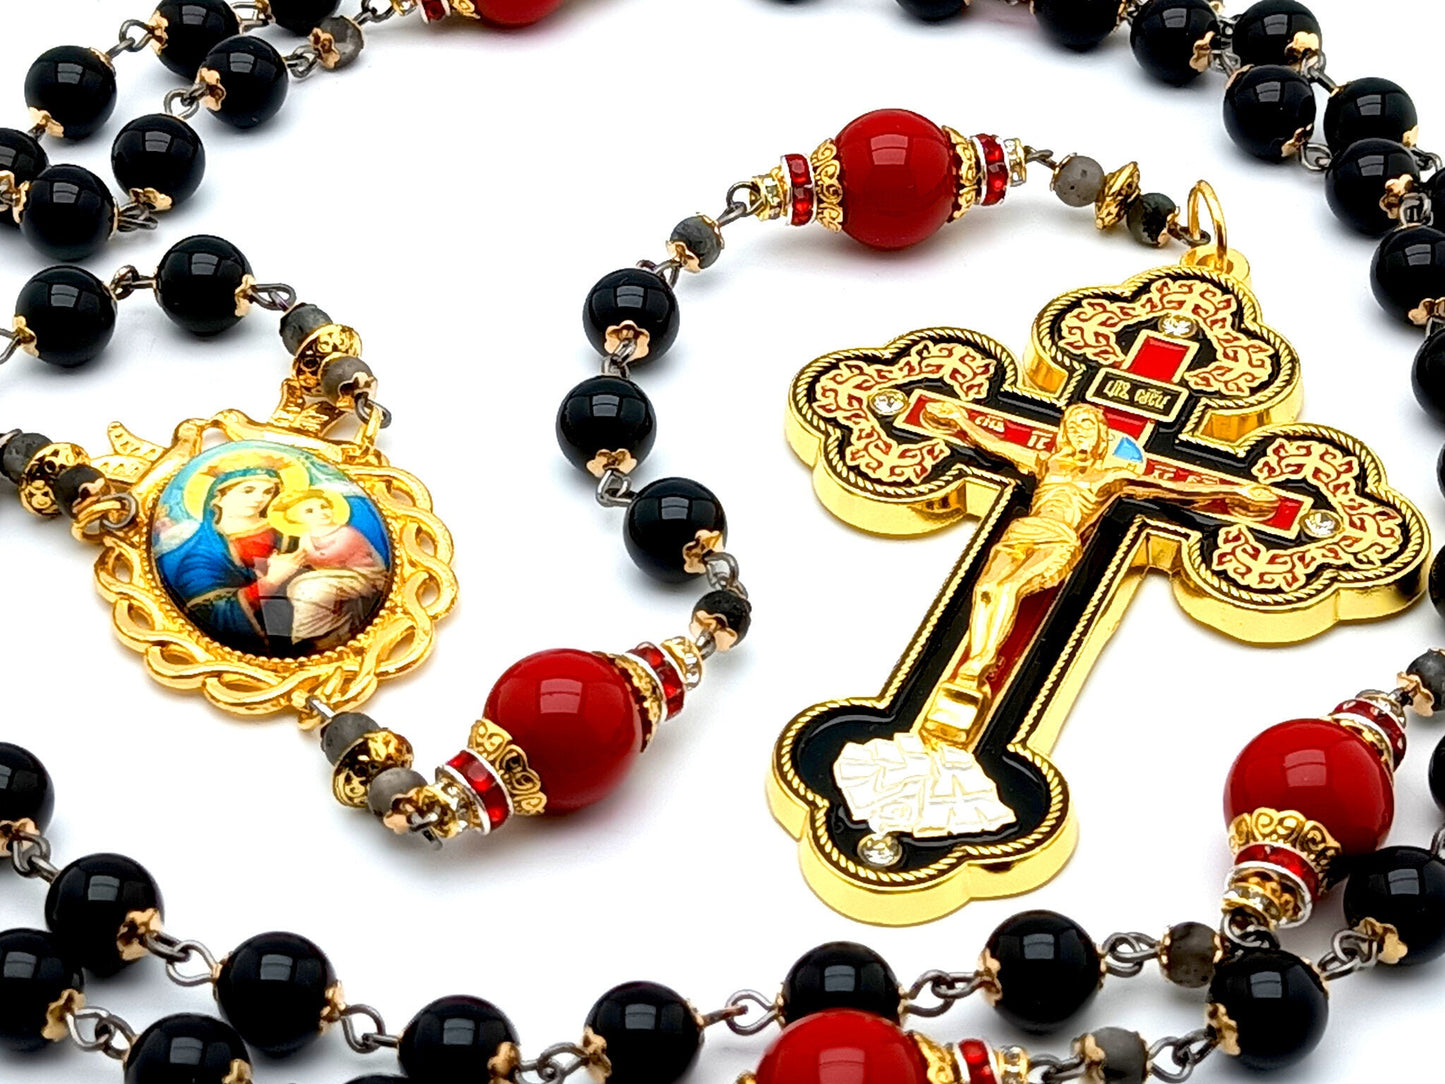 Our Lady of Perpetual Help unique rosary beads with onyx and red gemstone beads, ornate enamel crucifix and golden picture centre medal.